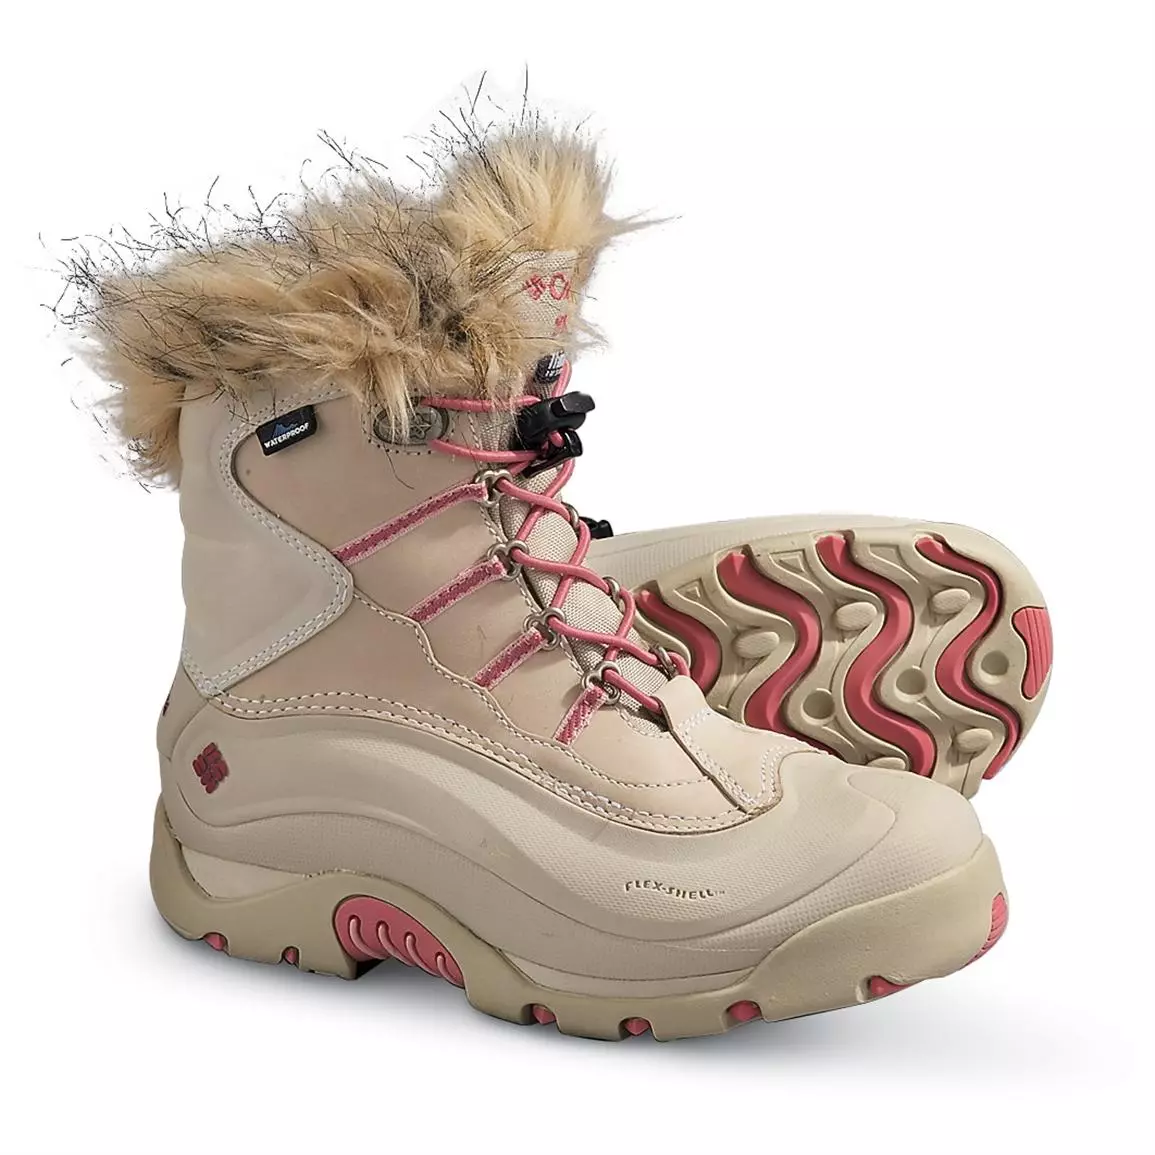 Kombia boots (64 photos): Women's winter and insulated children's models for girls Bugaboot and Minx, COLUMBIA reviews 2268_49